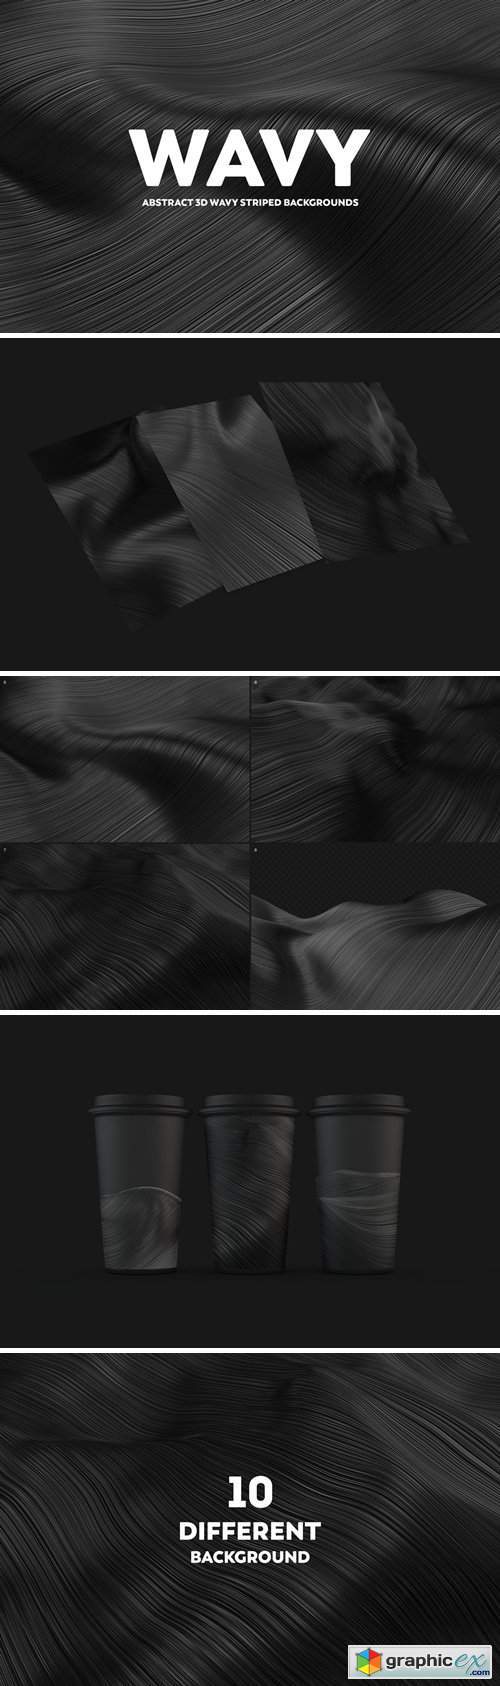 Abstract 3D Wavy Striped Backgrounds - Black Color